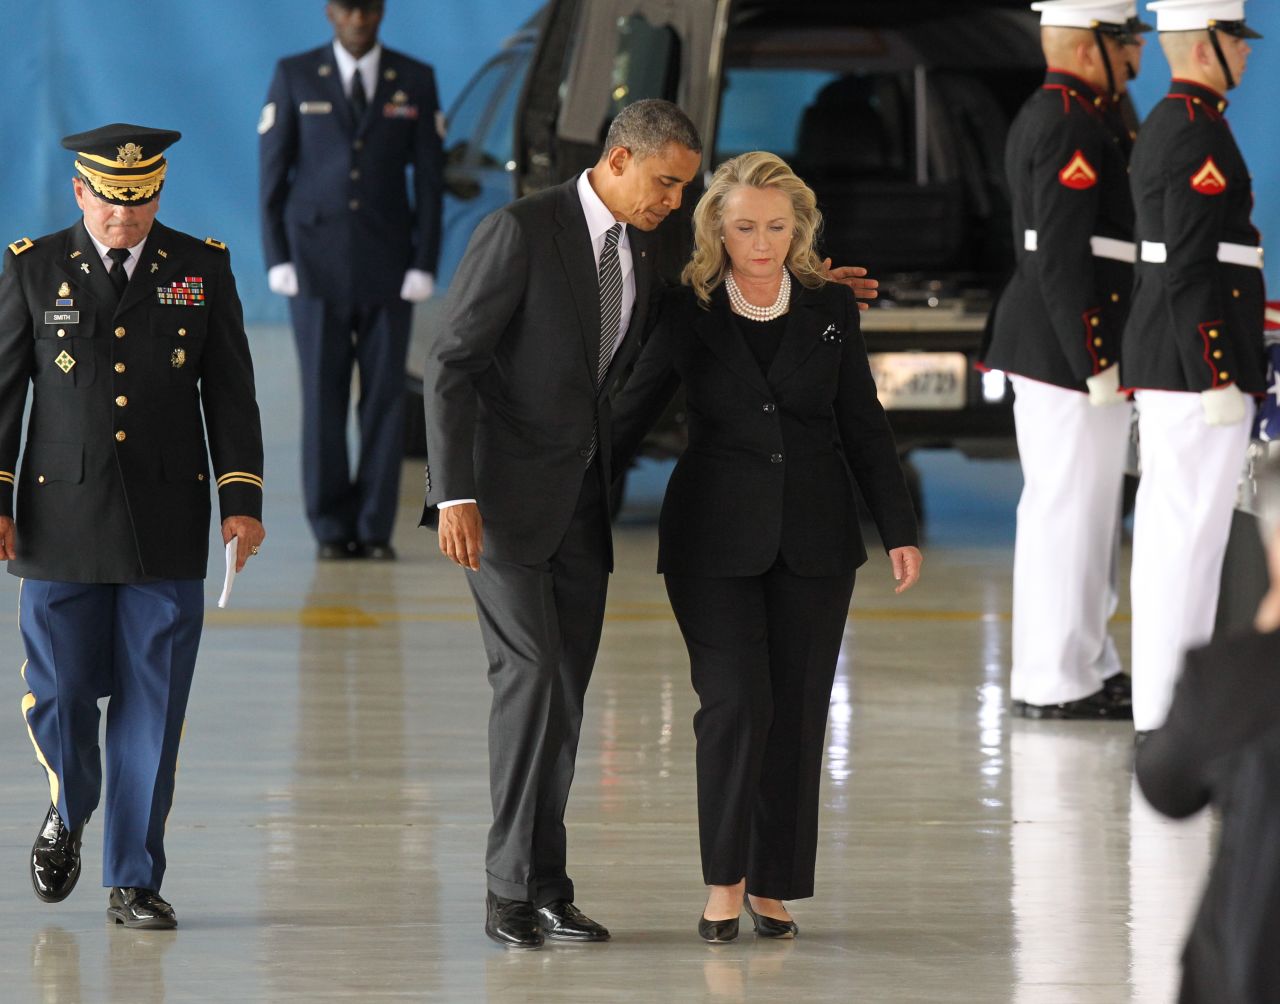 President Barack Obama and former Secretary of State Hillary Clinton came under intense scrutiny about the handling of the investigation of the attack on the U.S. Consulate in Benghazi, Libya, that led to the death of Ambassador Chris Stevens and three other embassy employees.